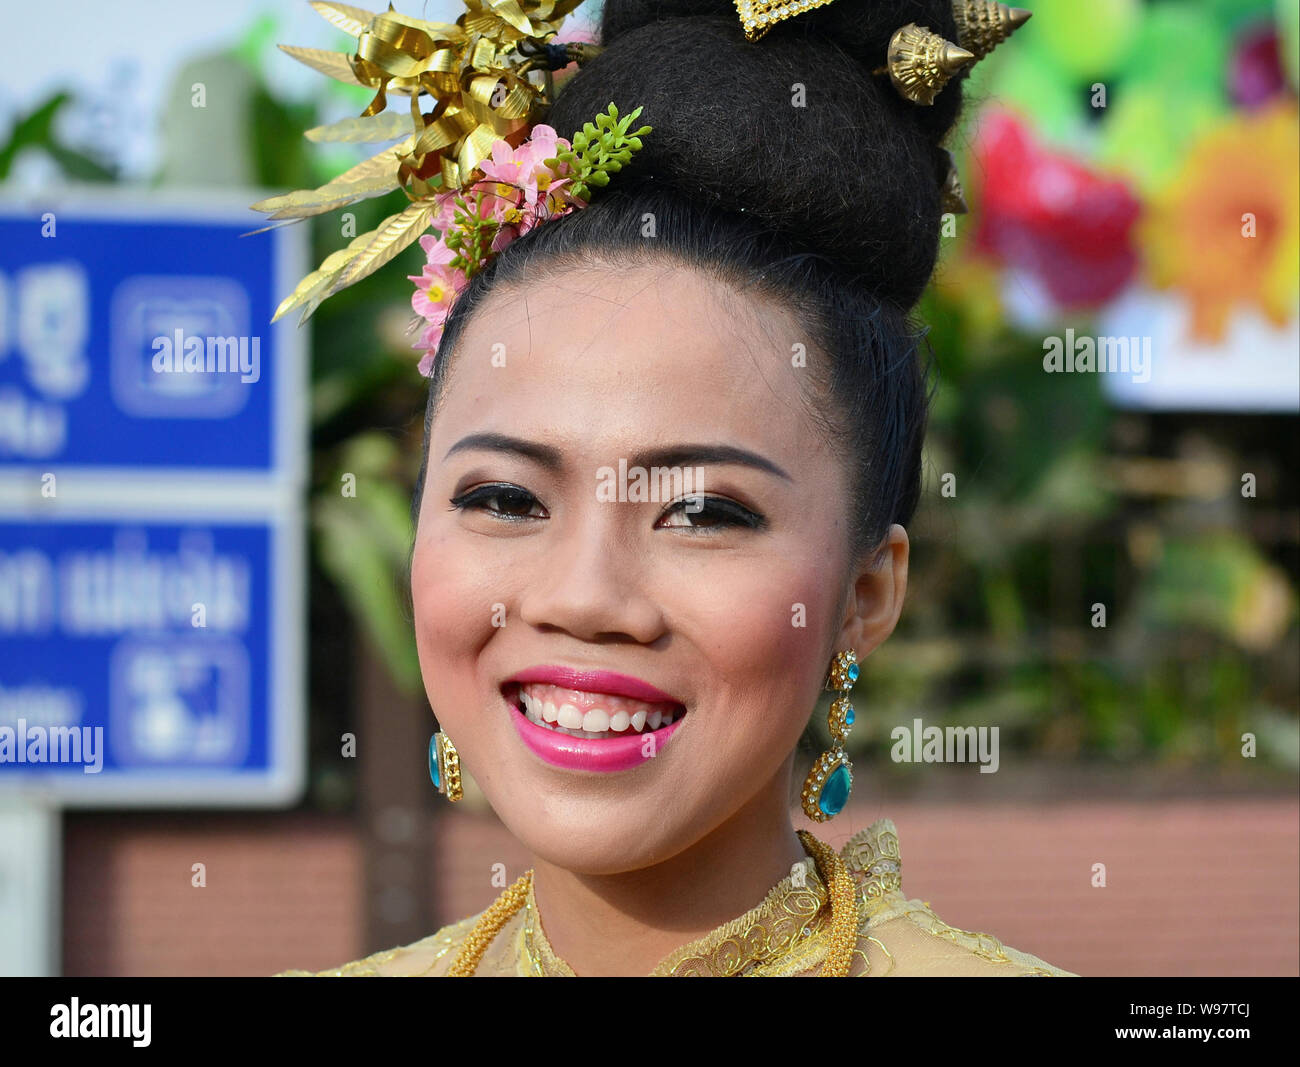 Dressed-up Thai girl with flowers in her hair takes part in the village's historical Lanna street parade and smiles for the camera. Stock Photo